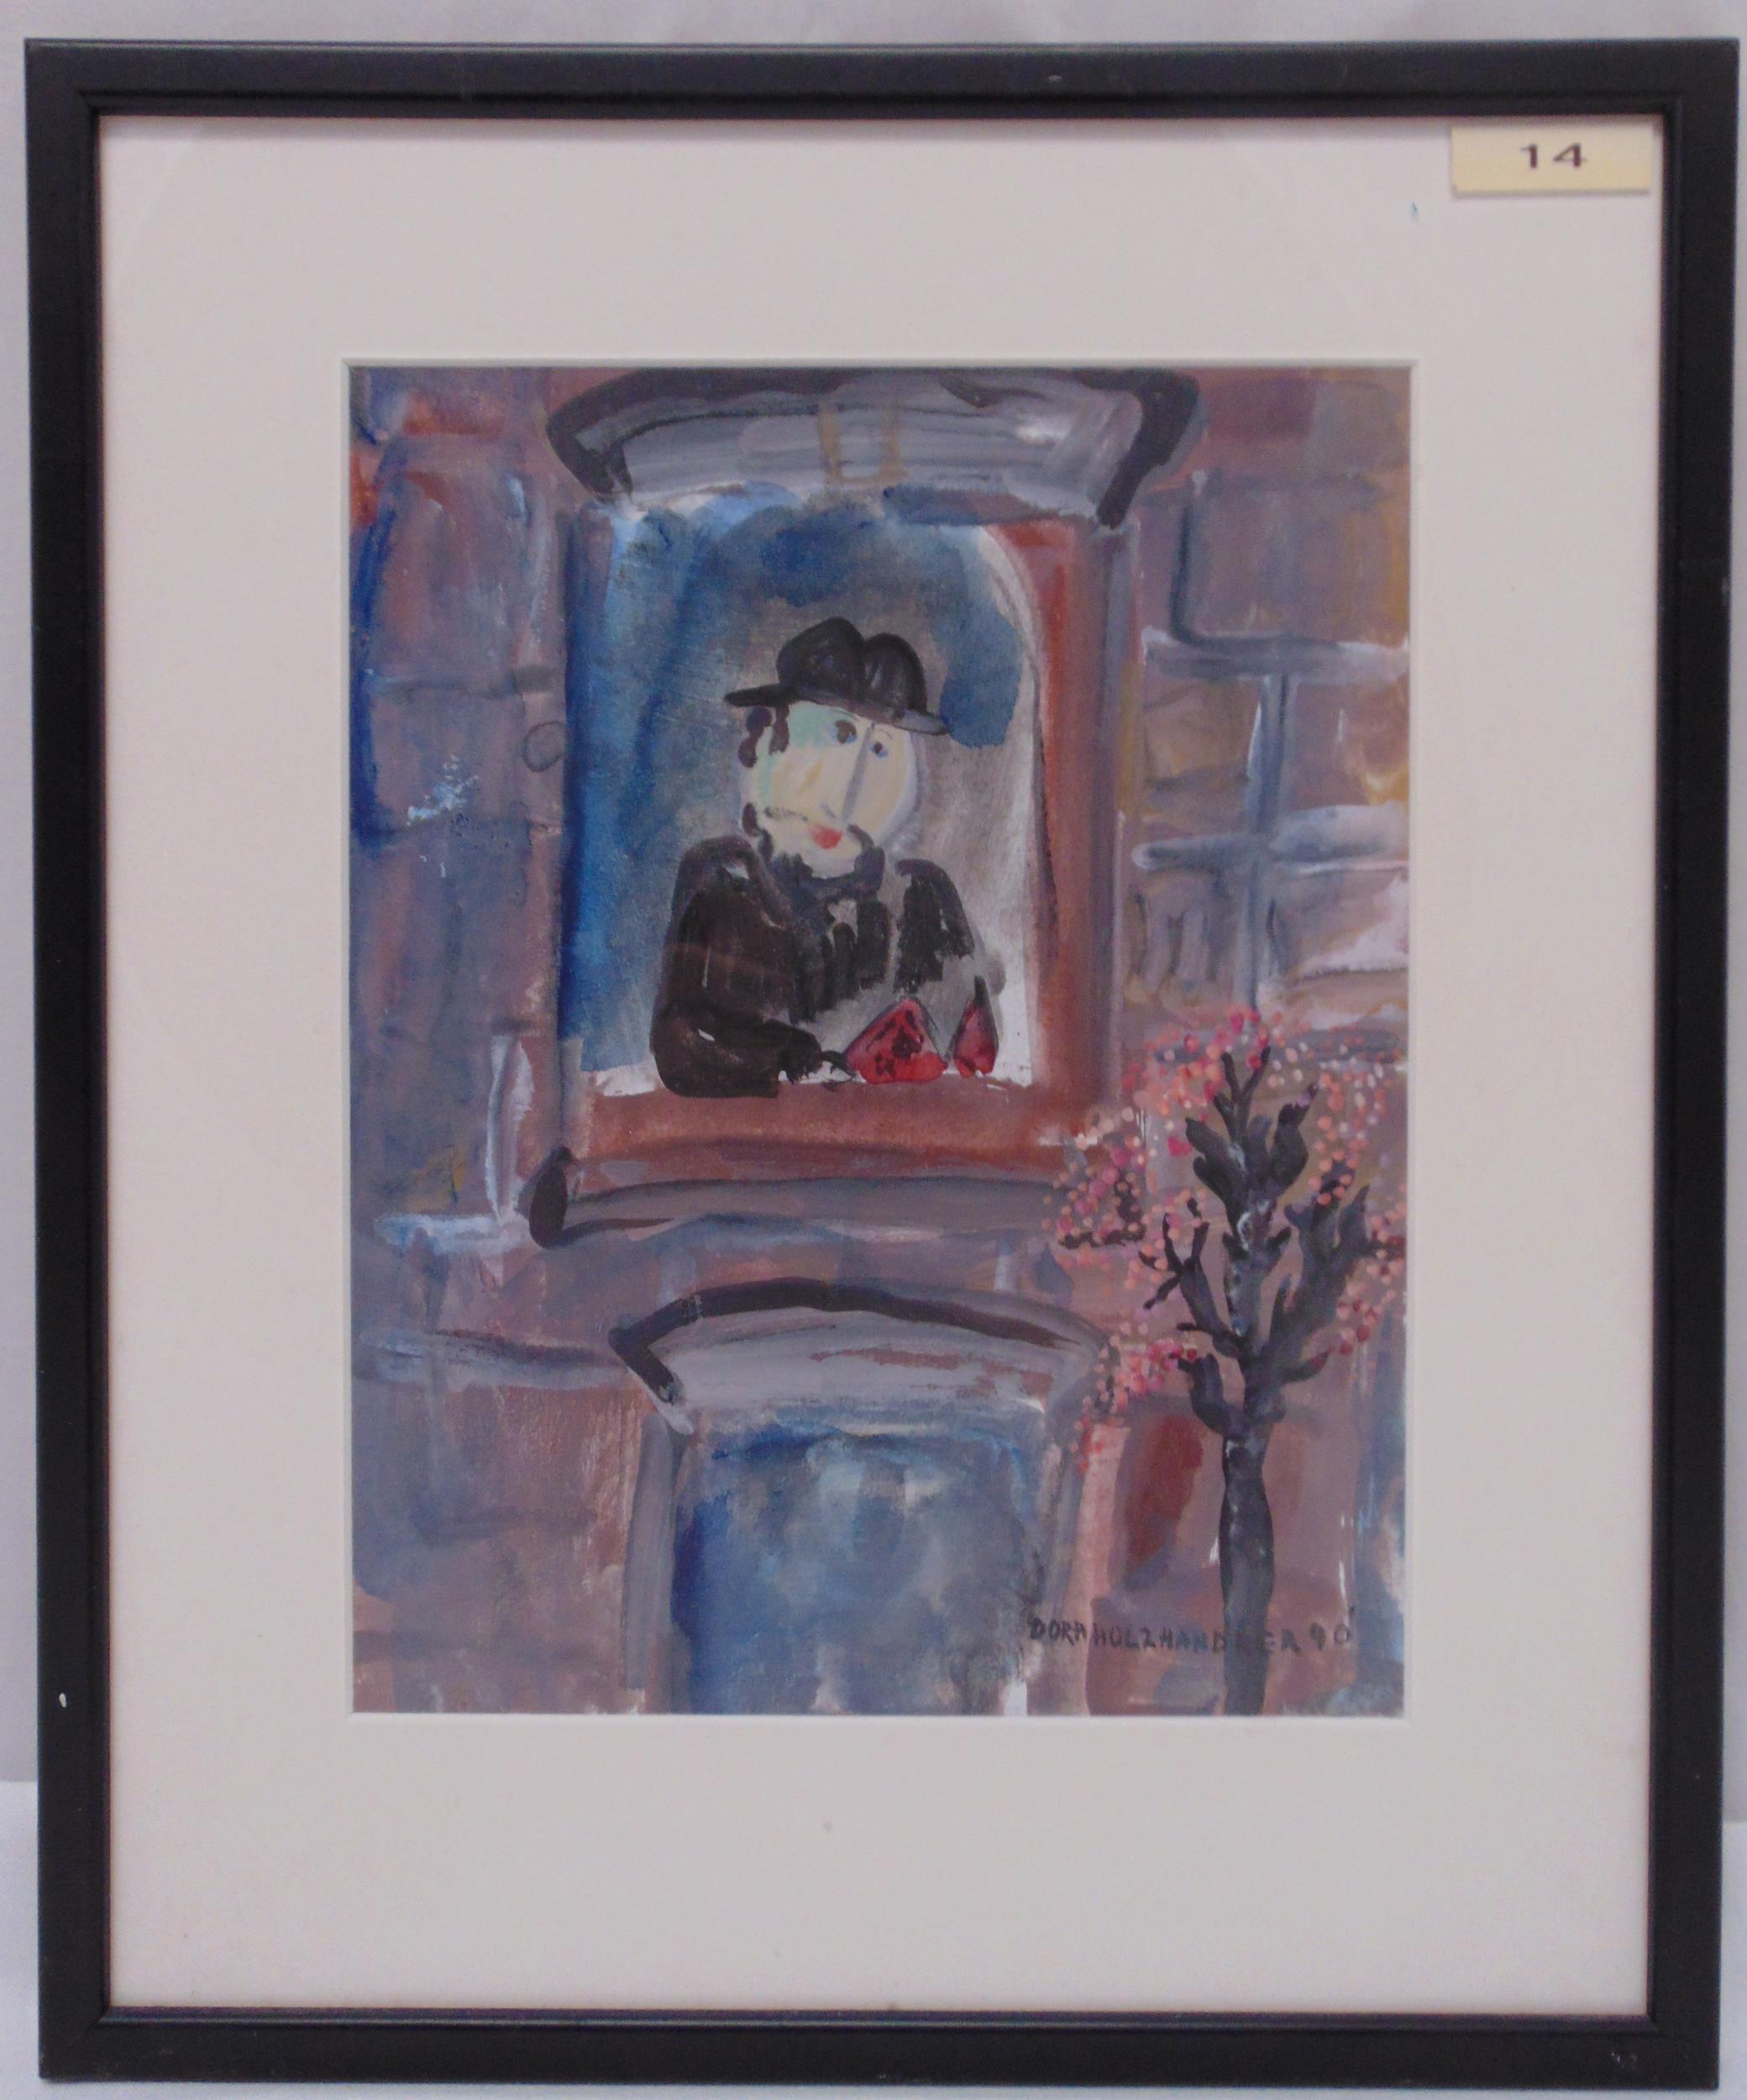 Dora Holzhandler framed and glazed watercolour of a Rabbi looking out of a window, signed bottom